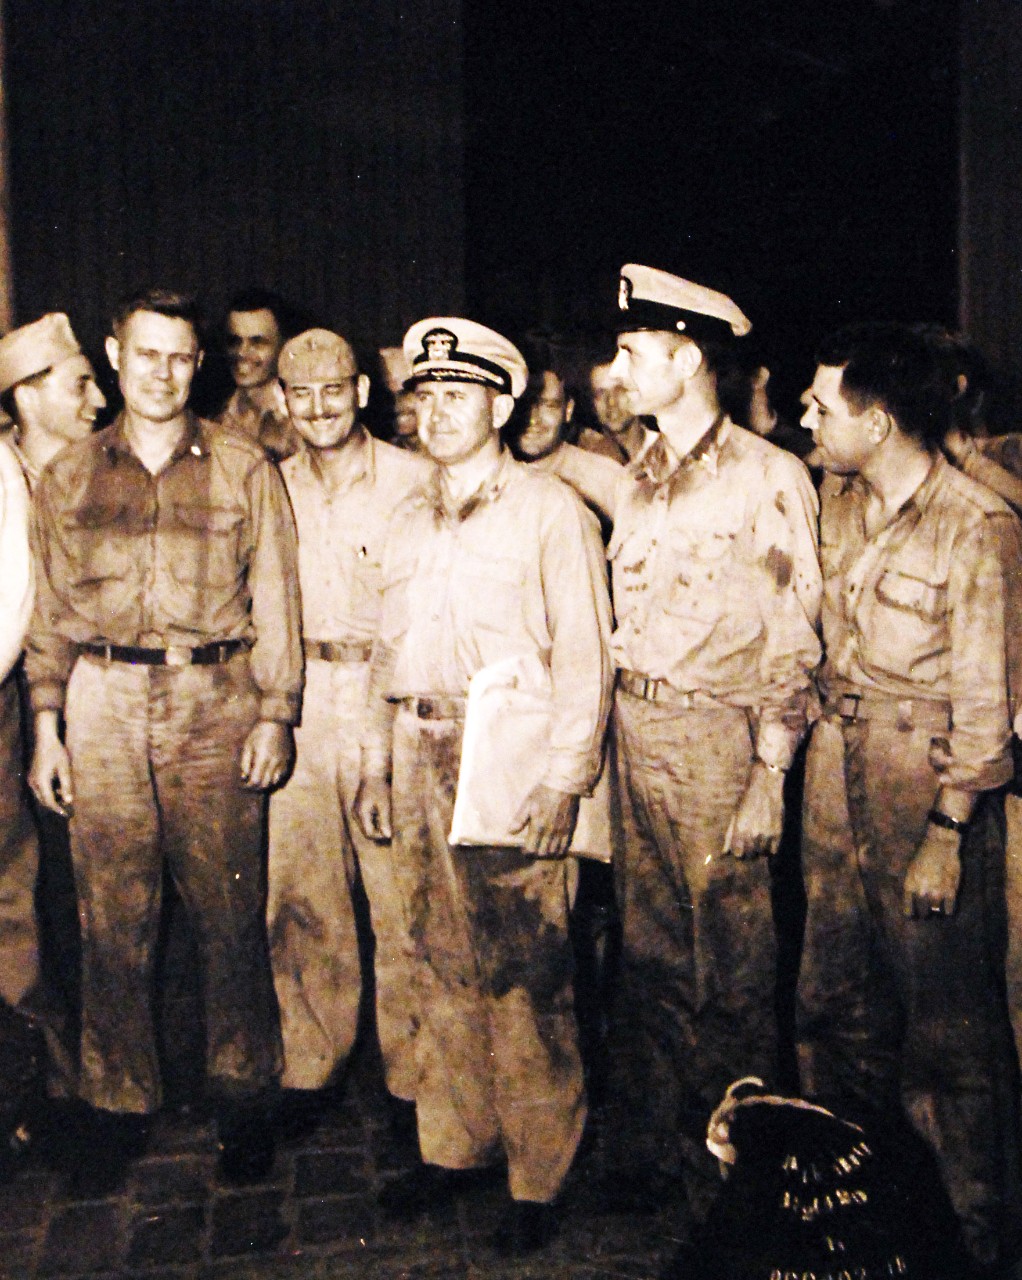 80-G-266504:  Survivors of USS Block Island (CVE 21), Casablanca, Morocco. Shown:  Captain Hughes and other officers.   Photographed by L.F. Cirzan (USS Bogue (CVE 9), June 1, 1944.  U.S. Navy Photograph, now in the collections of the National Archives.   (2016/07/12).